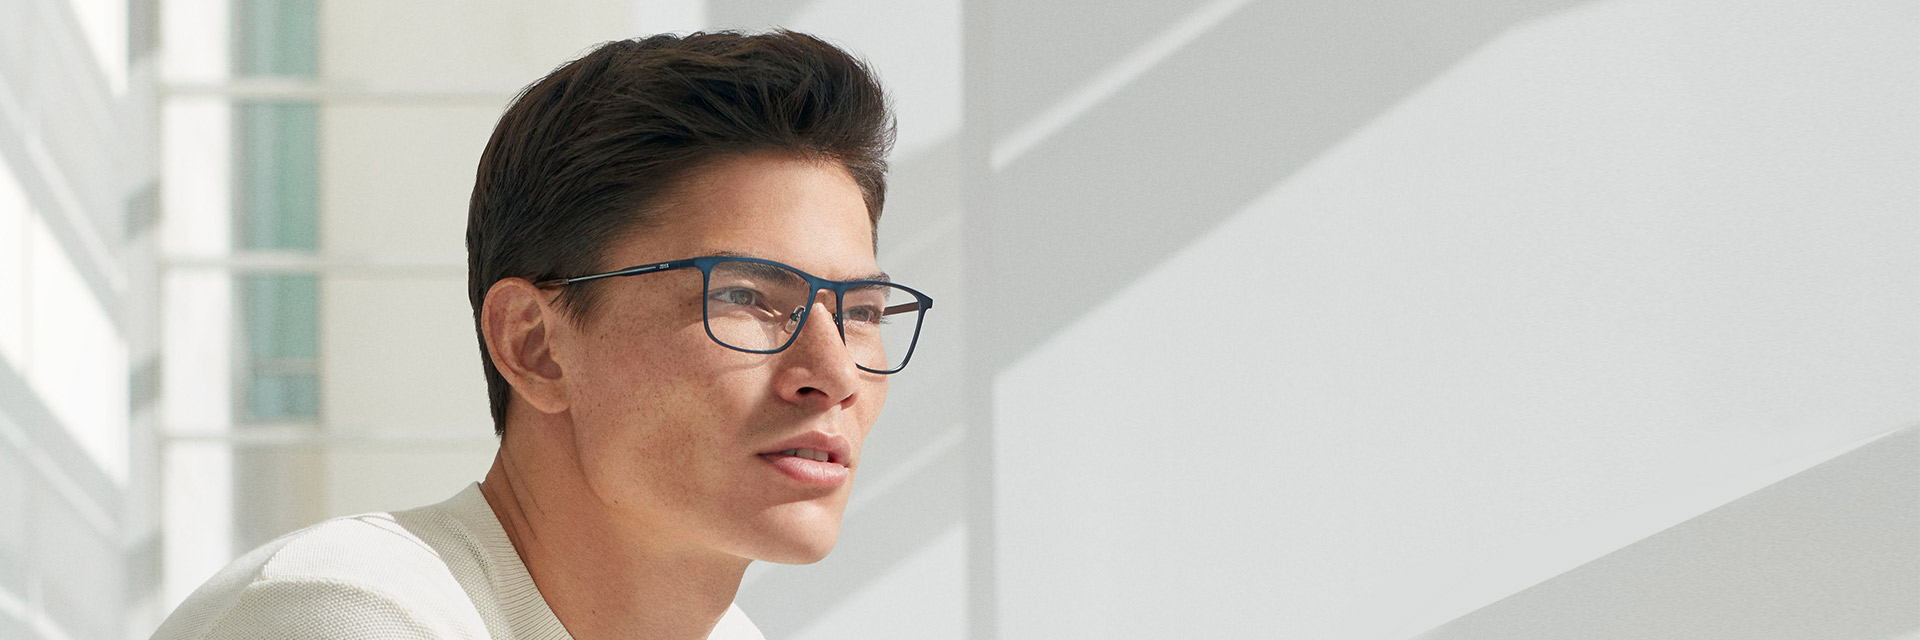 Young man wearing ZEISS eyewear by Marchon.